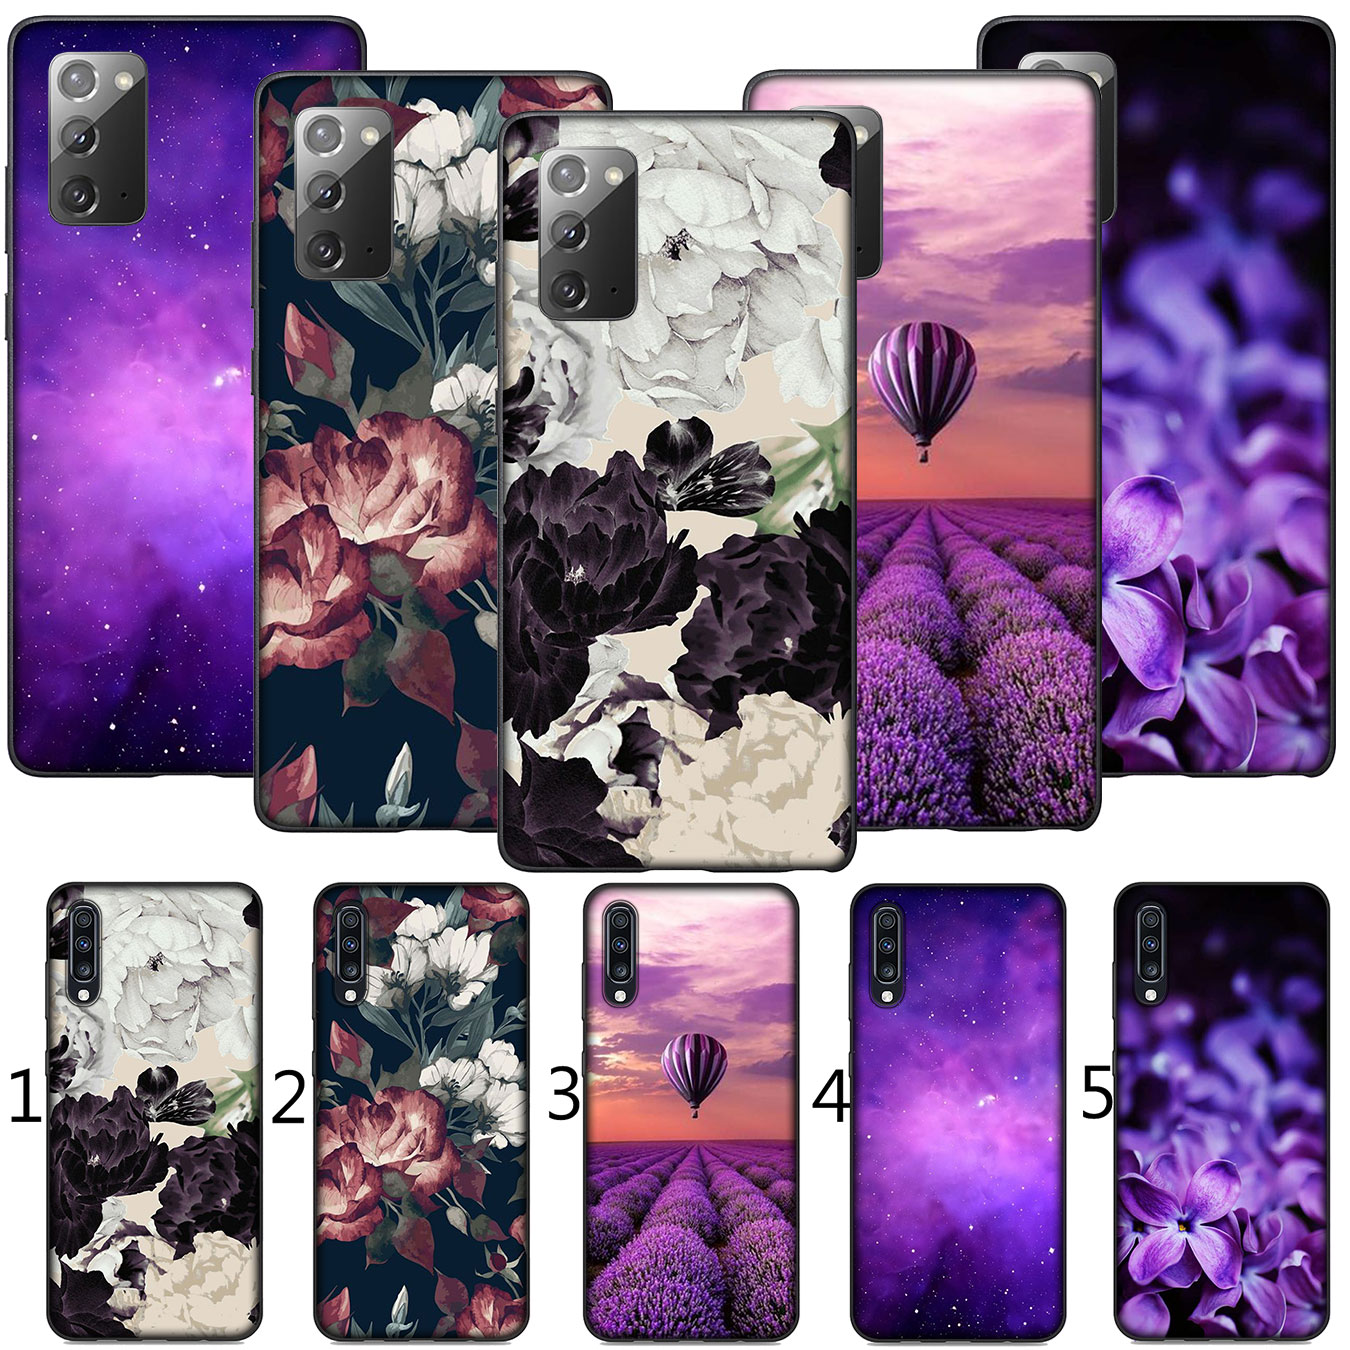 Samsung Galaxy A02S J2 J4 Core J5 J6 Plus J7 Prime j6+ A42 + Phone Case Soft Silicone Casing Rose infinity on Purple lavender flower